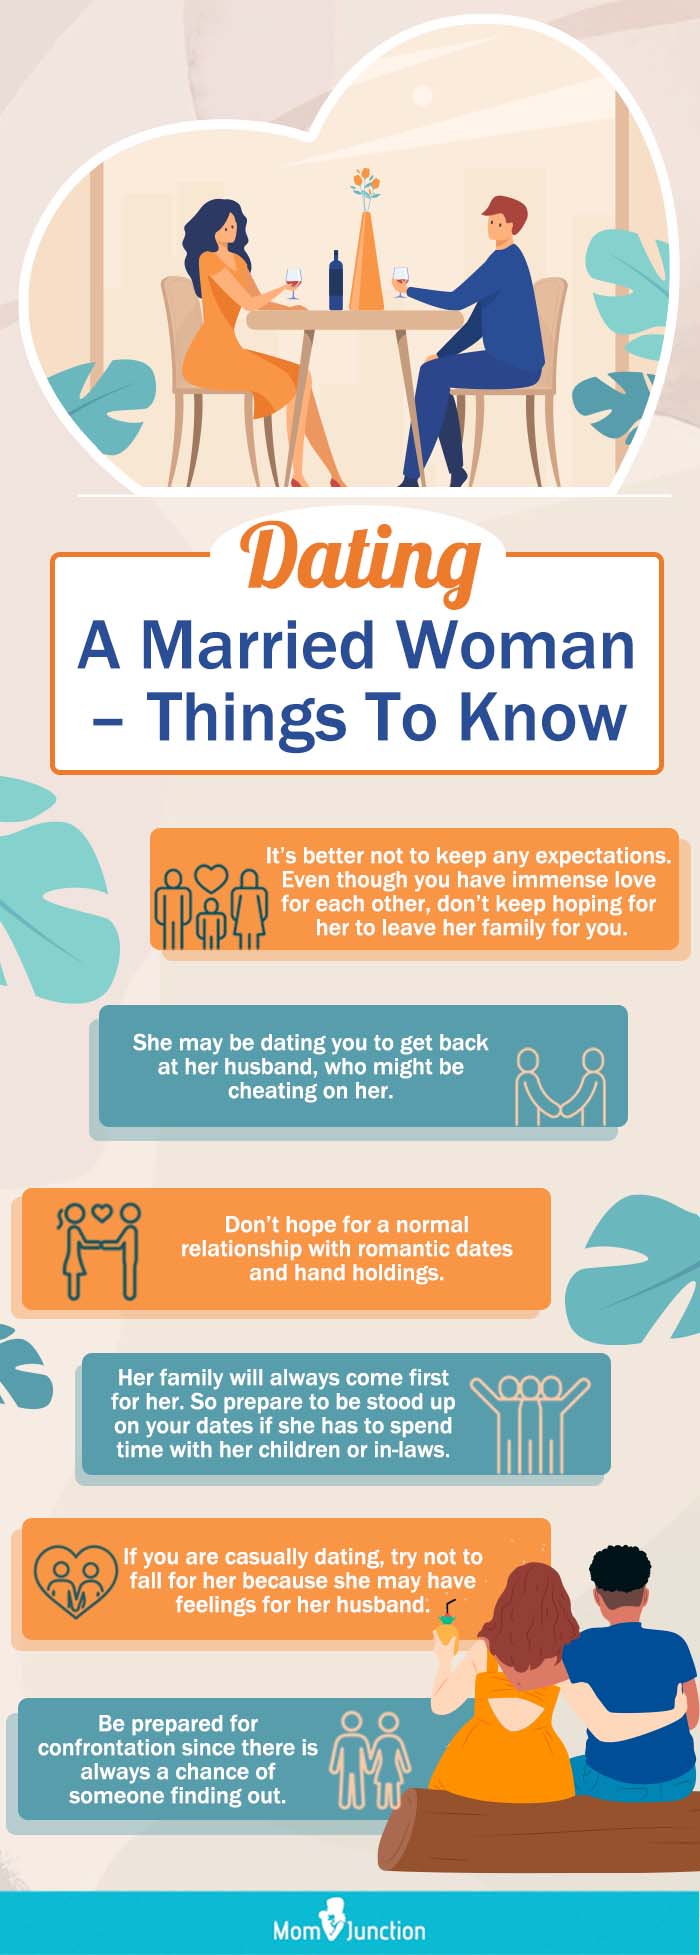 8 Things Every Woman Should Do Before Getting Married